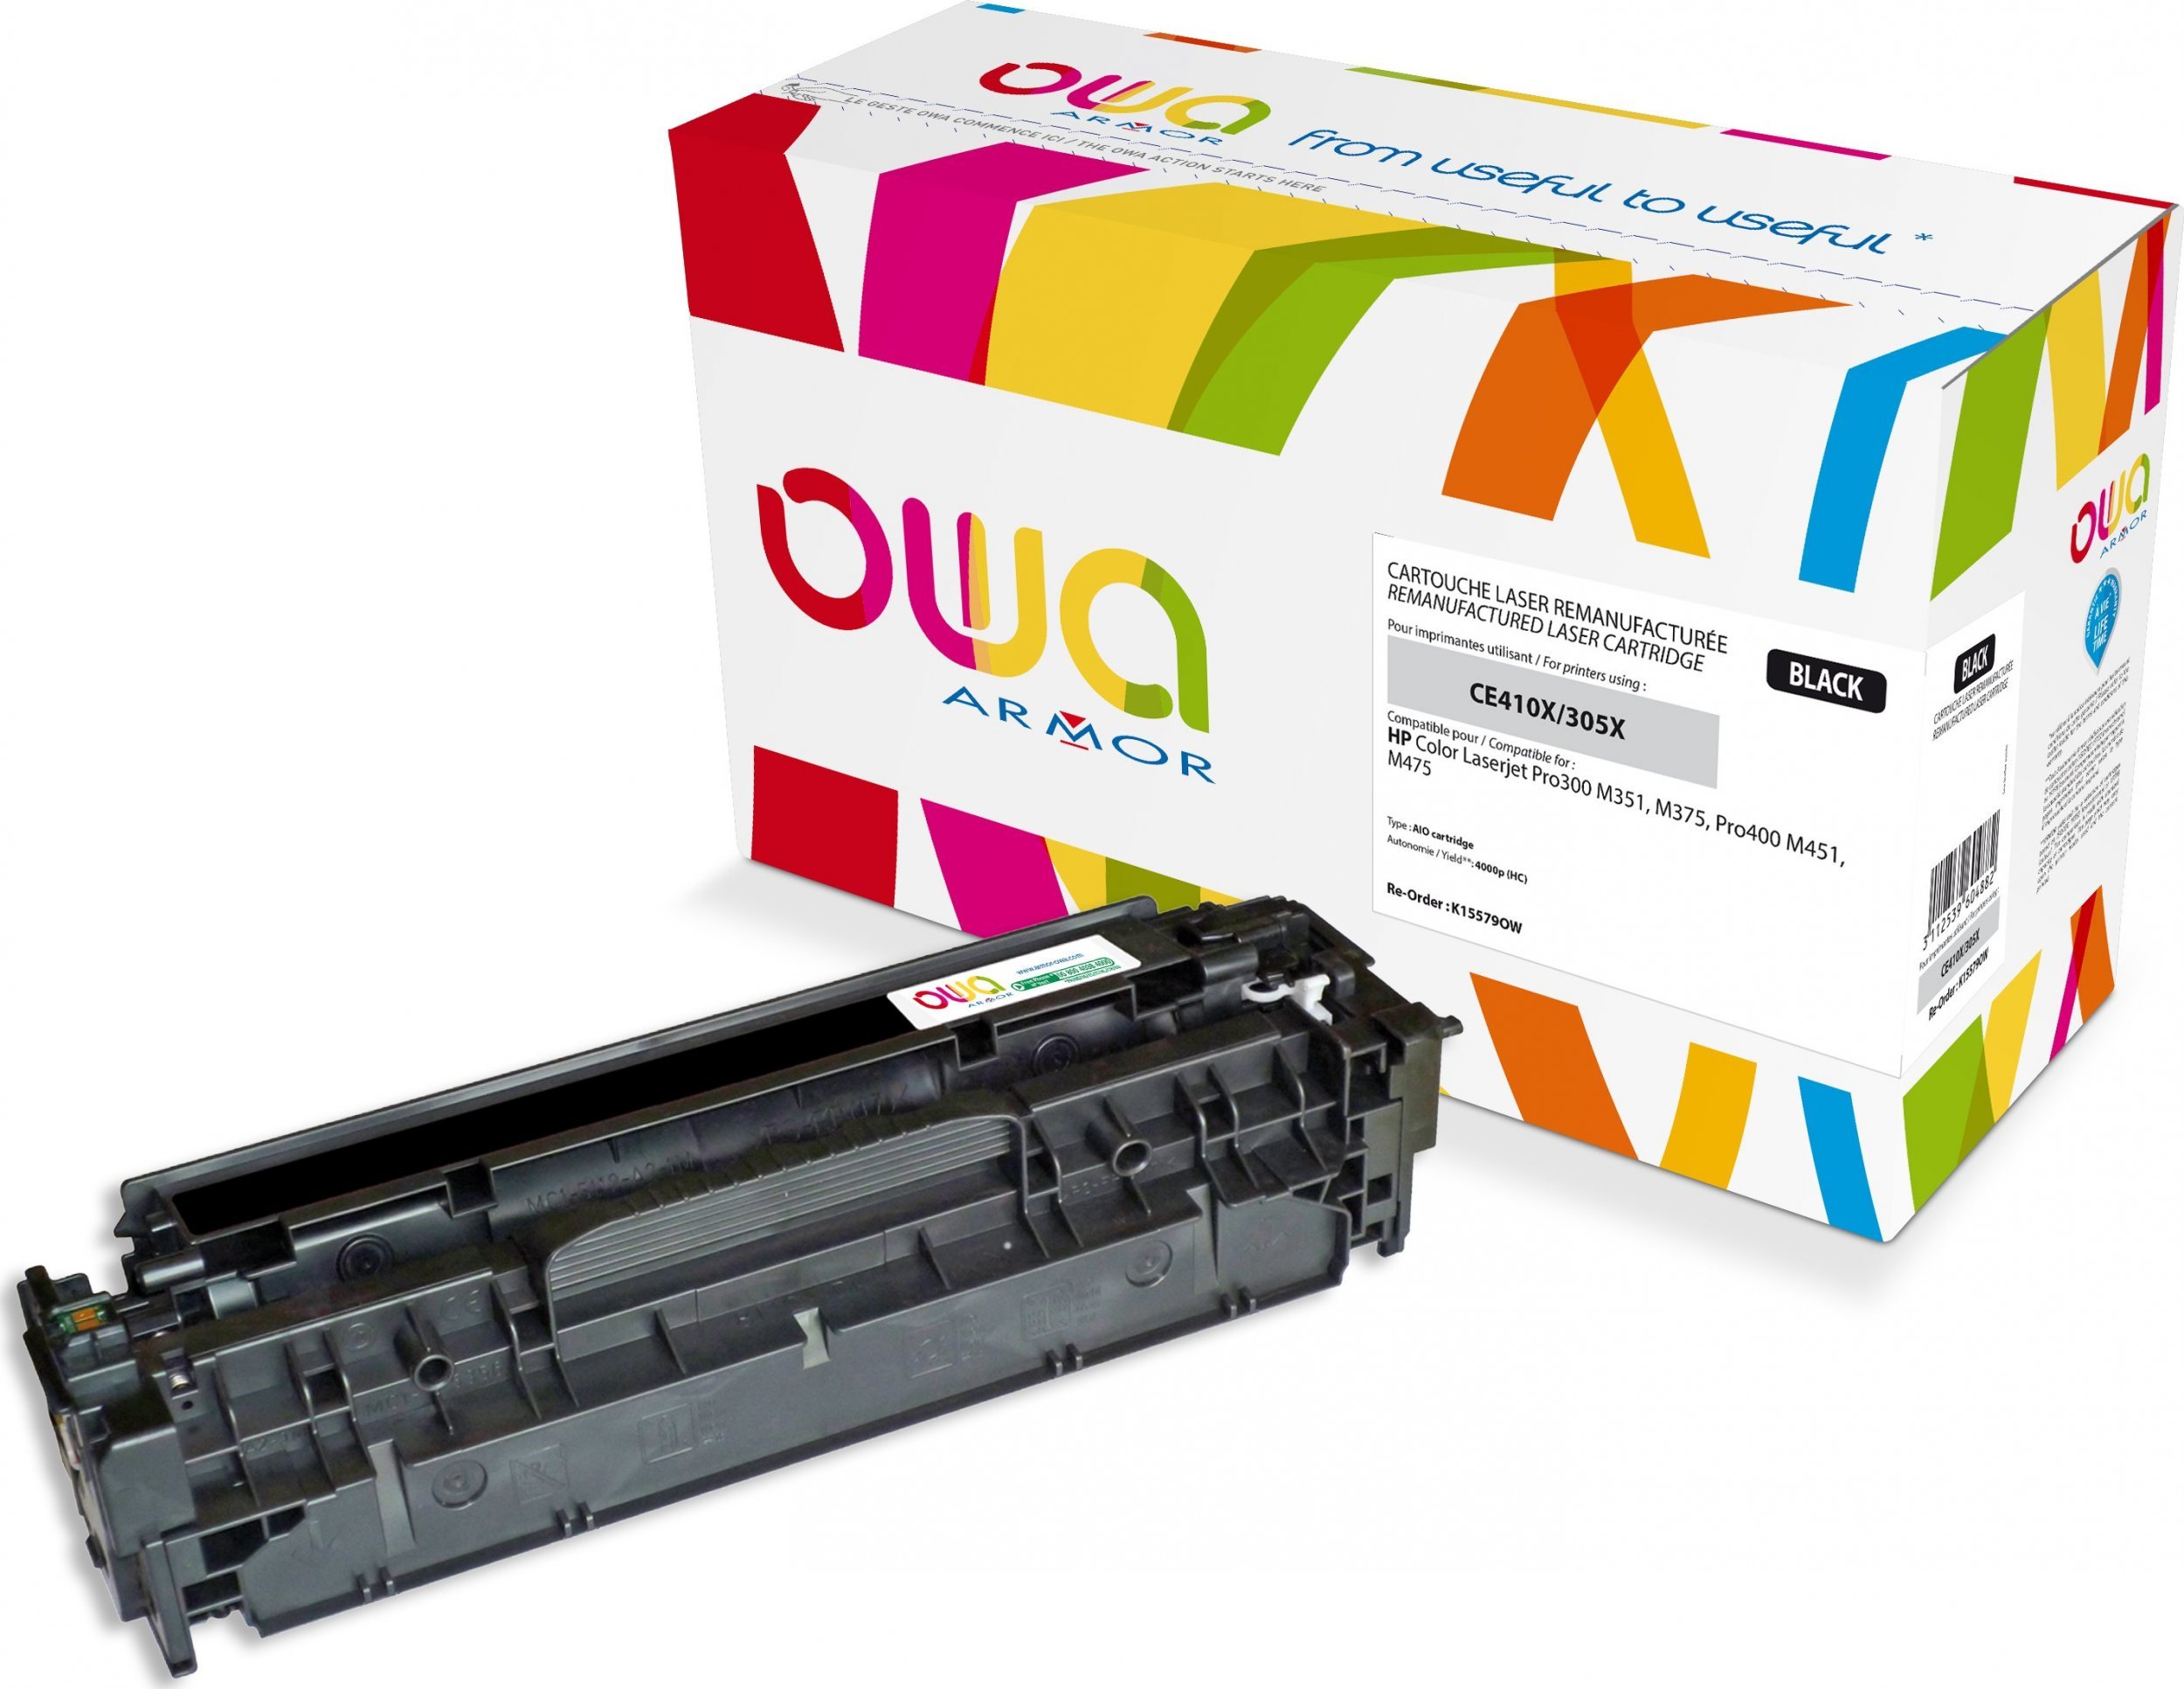 Toner OWA Armor Armor - High Capacity - black - Toner cartridge (Alternative for: HP CE410X) - for LaserJet Pro 300 color M351a, 300 color MFP M375nw, 400 color M451, 400 color MFP M475 (K15579OW)